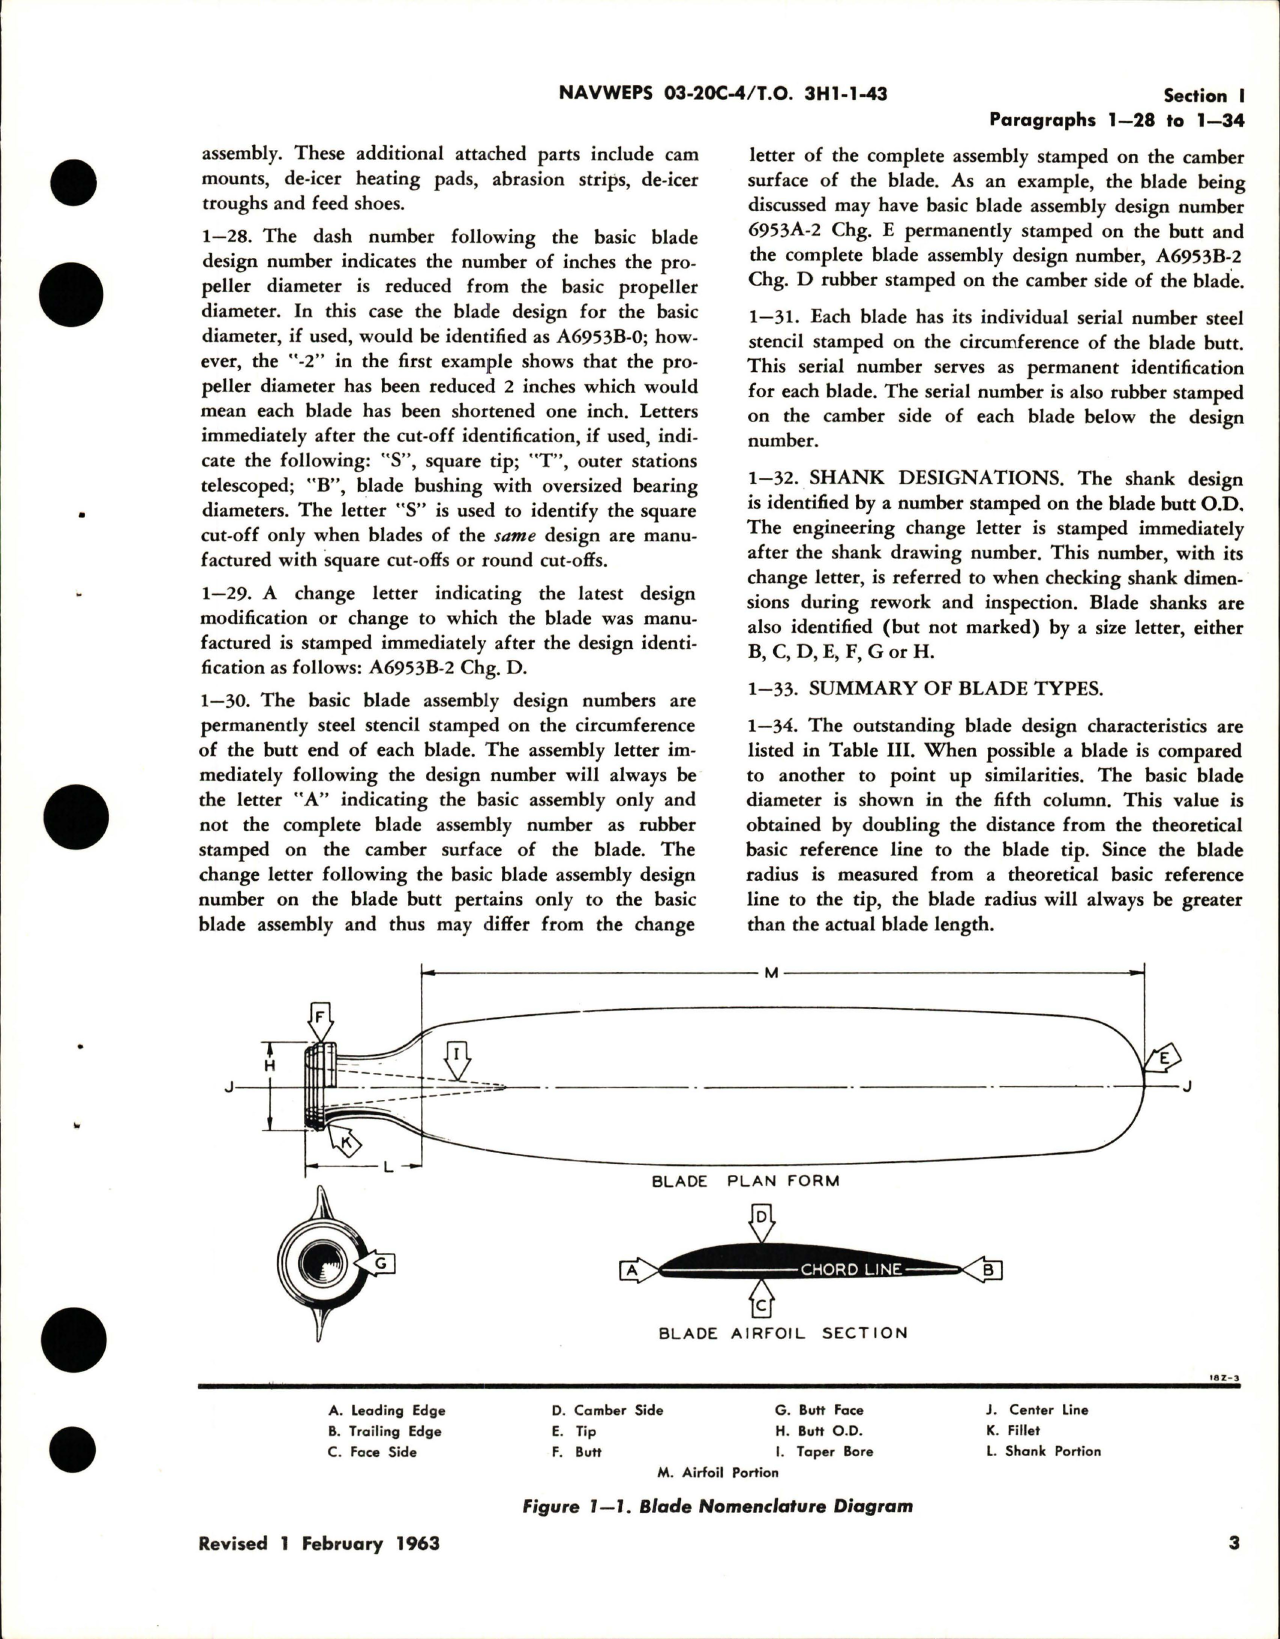 Sample page 9 from AirCorps Library document: Overhaul Instructions for Aluminum Alloy Propeller Blades